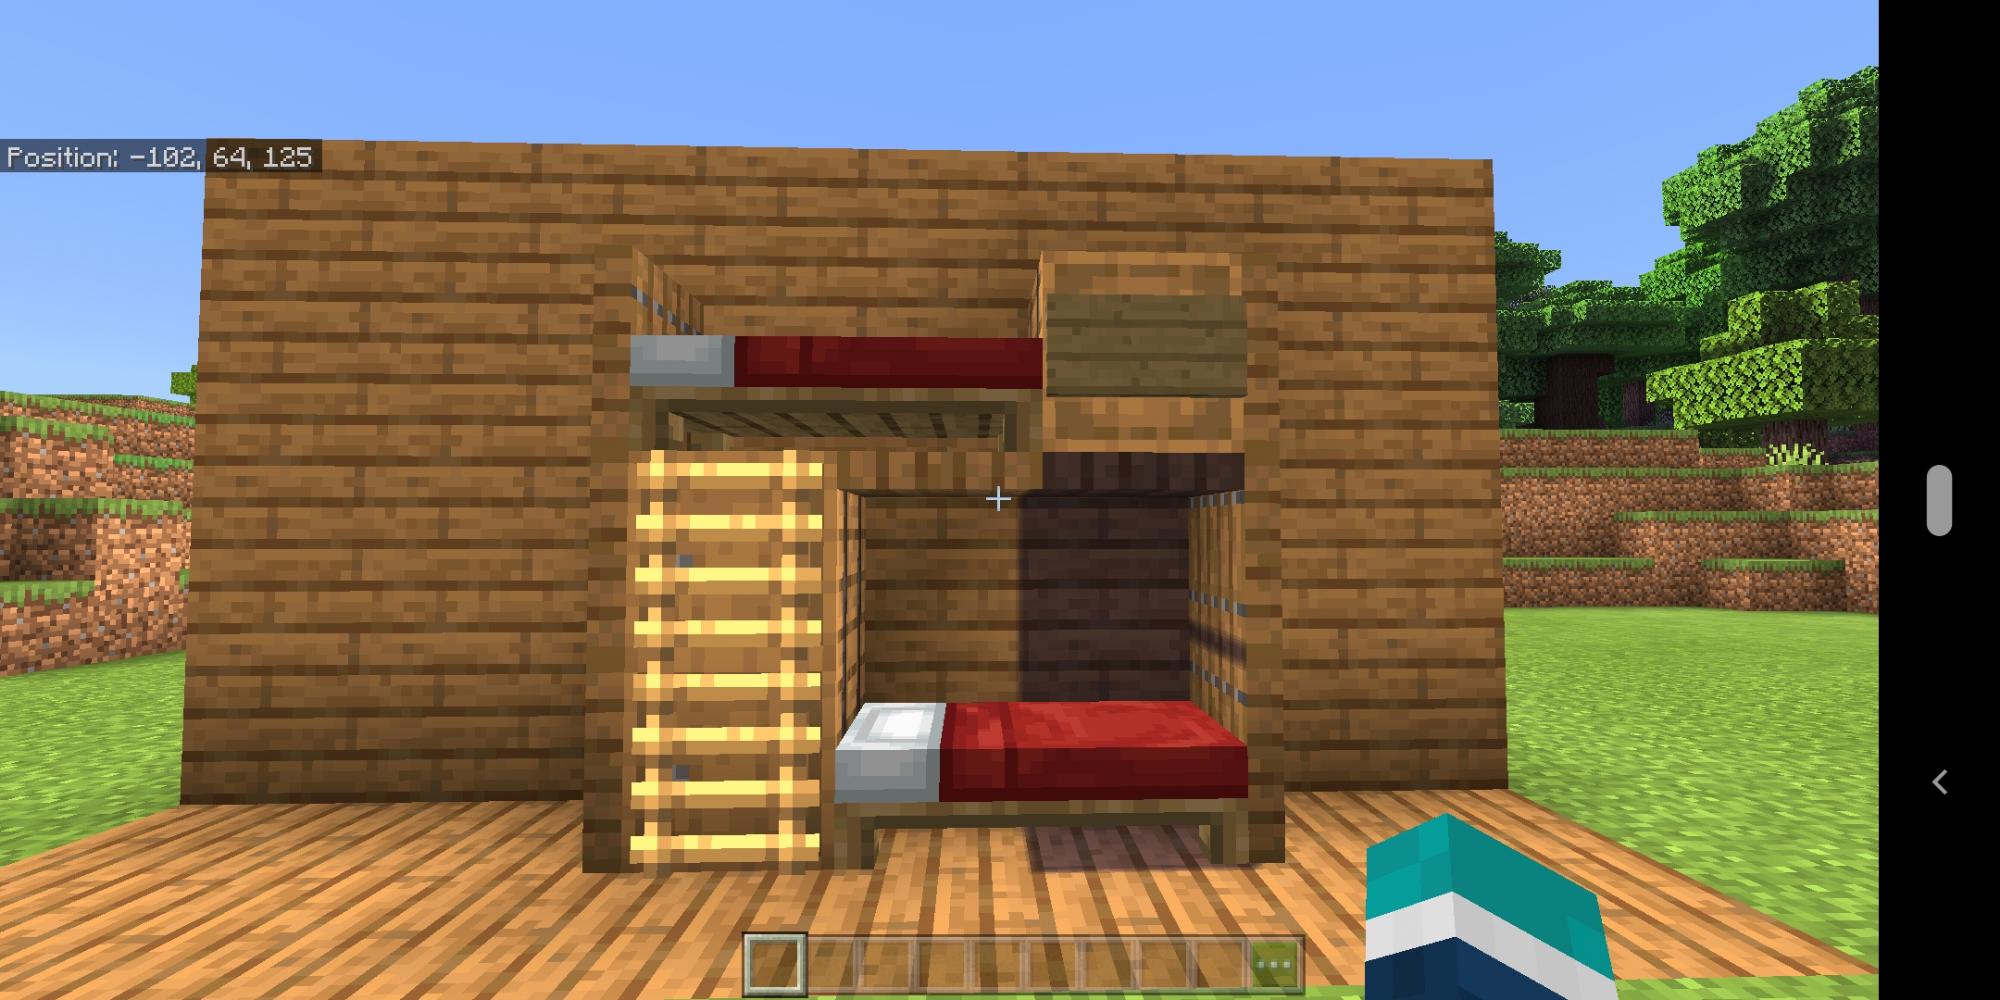 This Bunk Bed I Made Fandom, How To Do A Bunk Bed In Minecraft